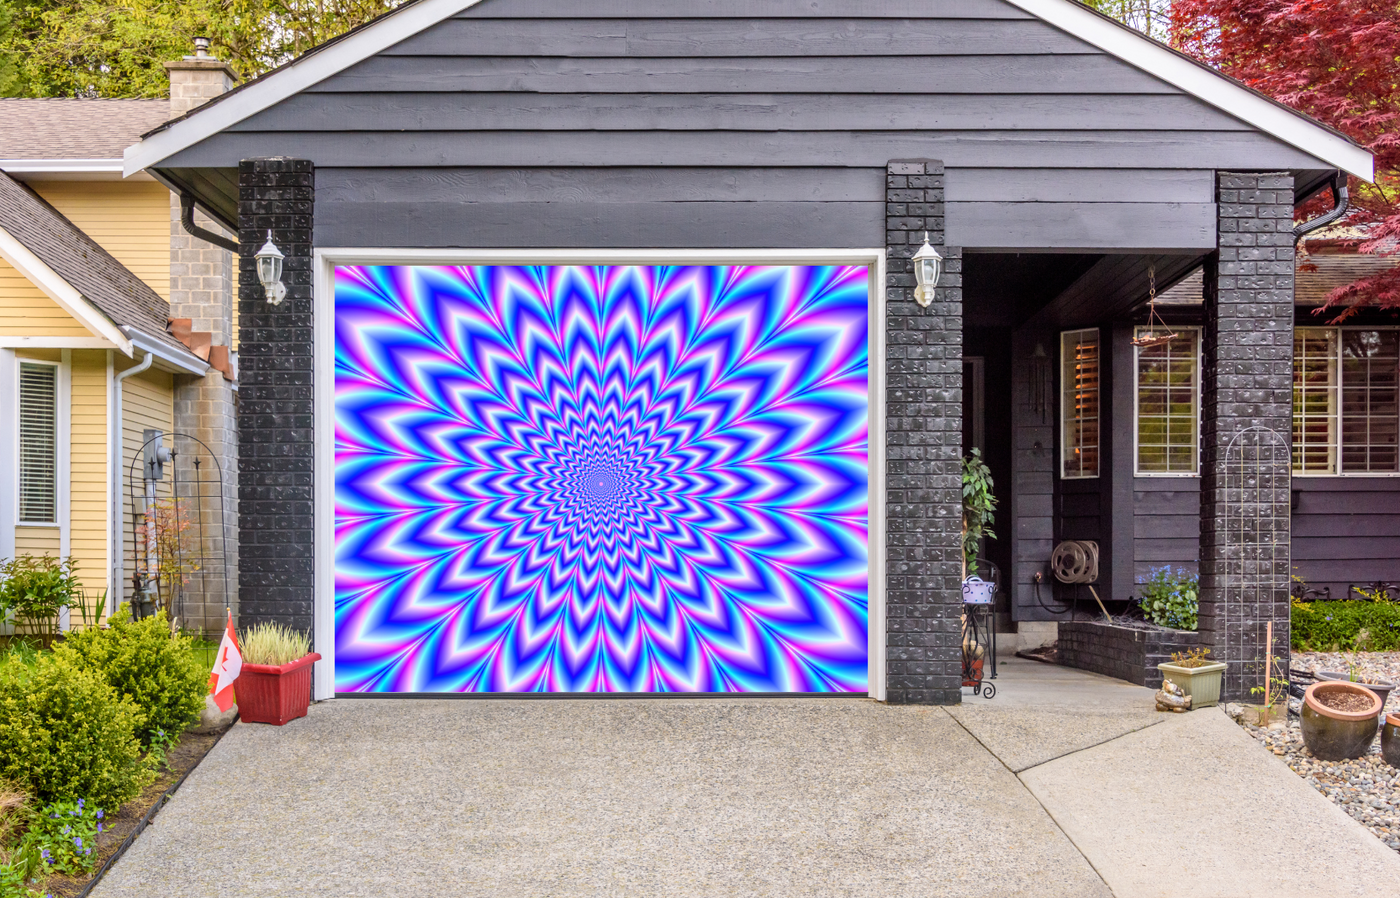 Crinkle Cut Pulse in Blue Pink and Violet Psychedelic Garage Door Cover Wrap